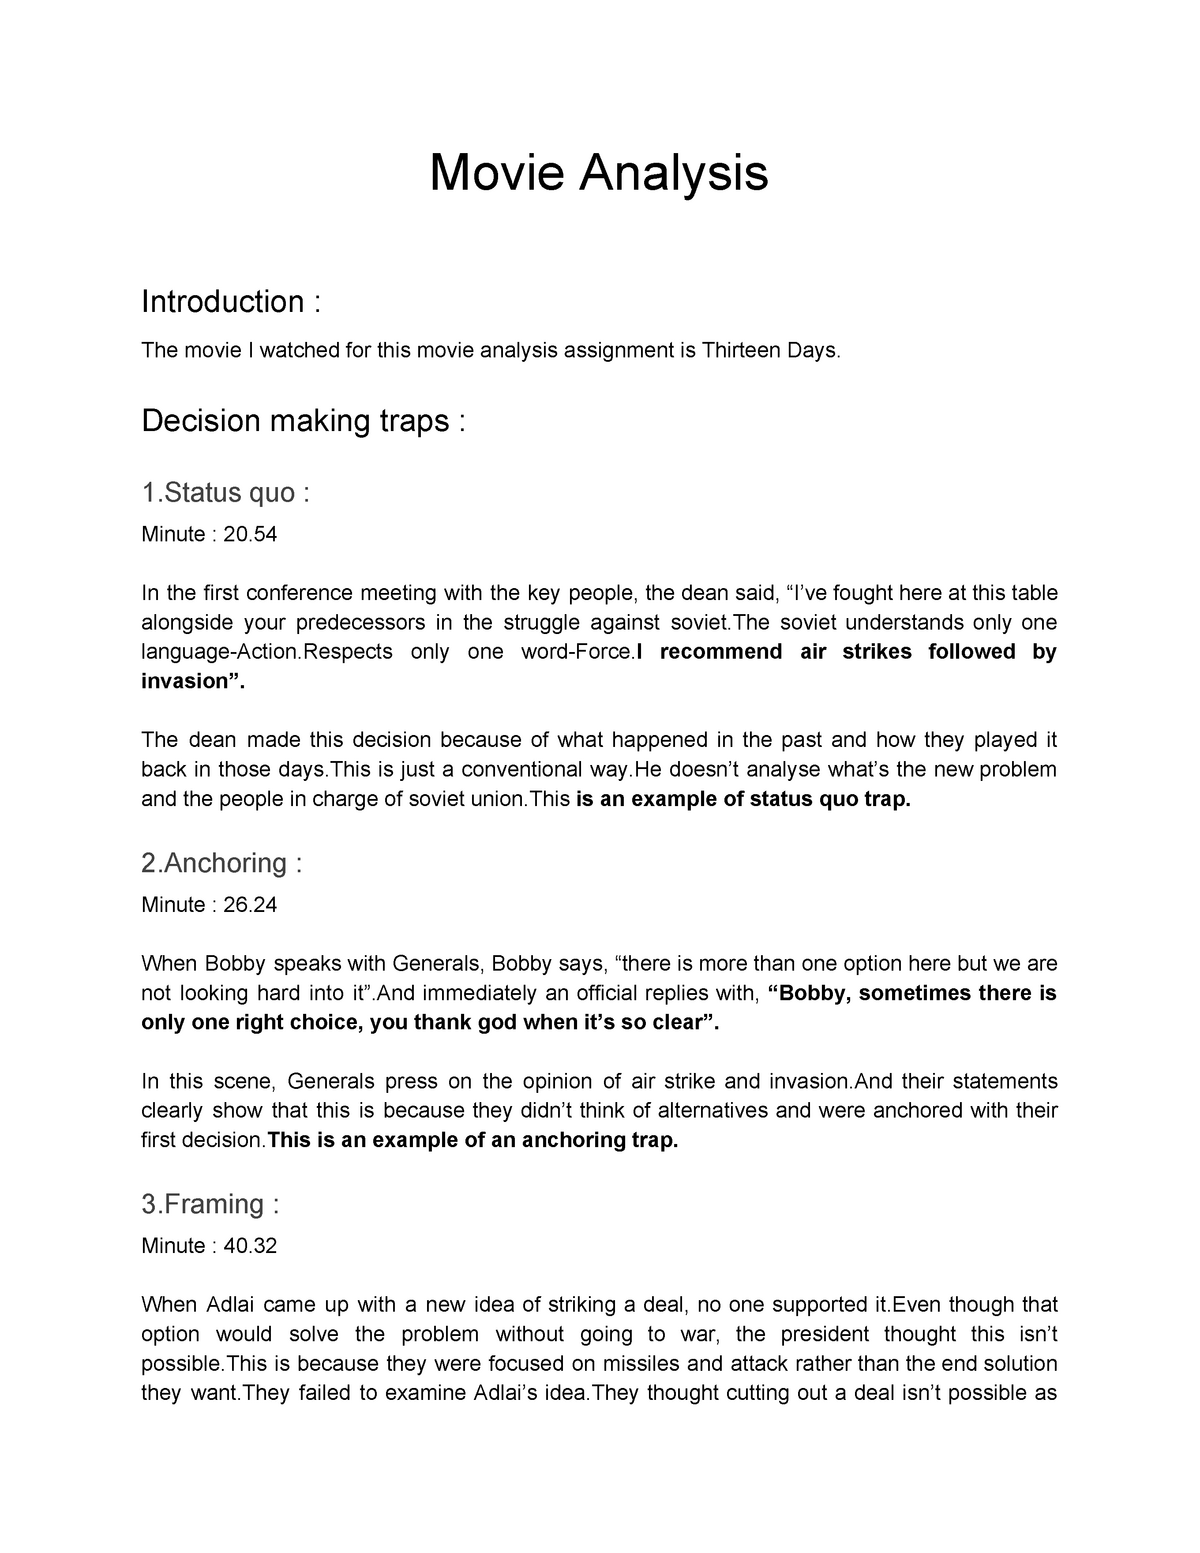 how to write an essay about movie analysis